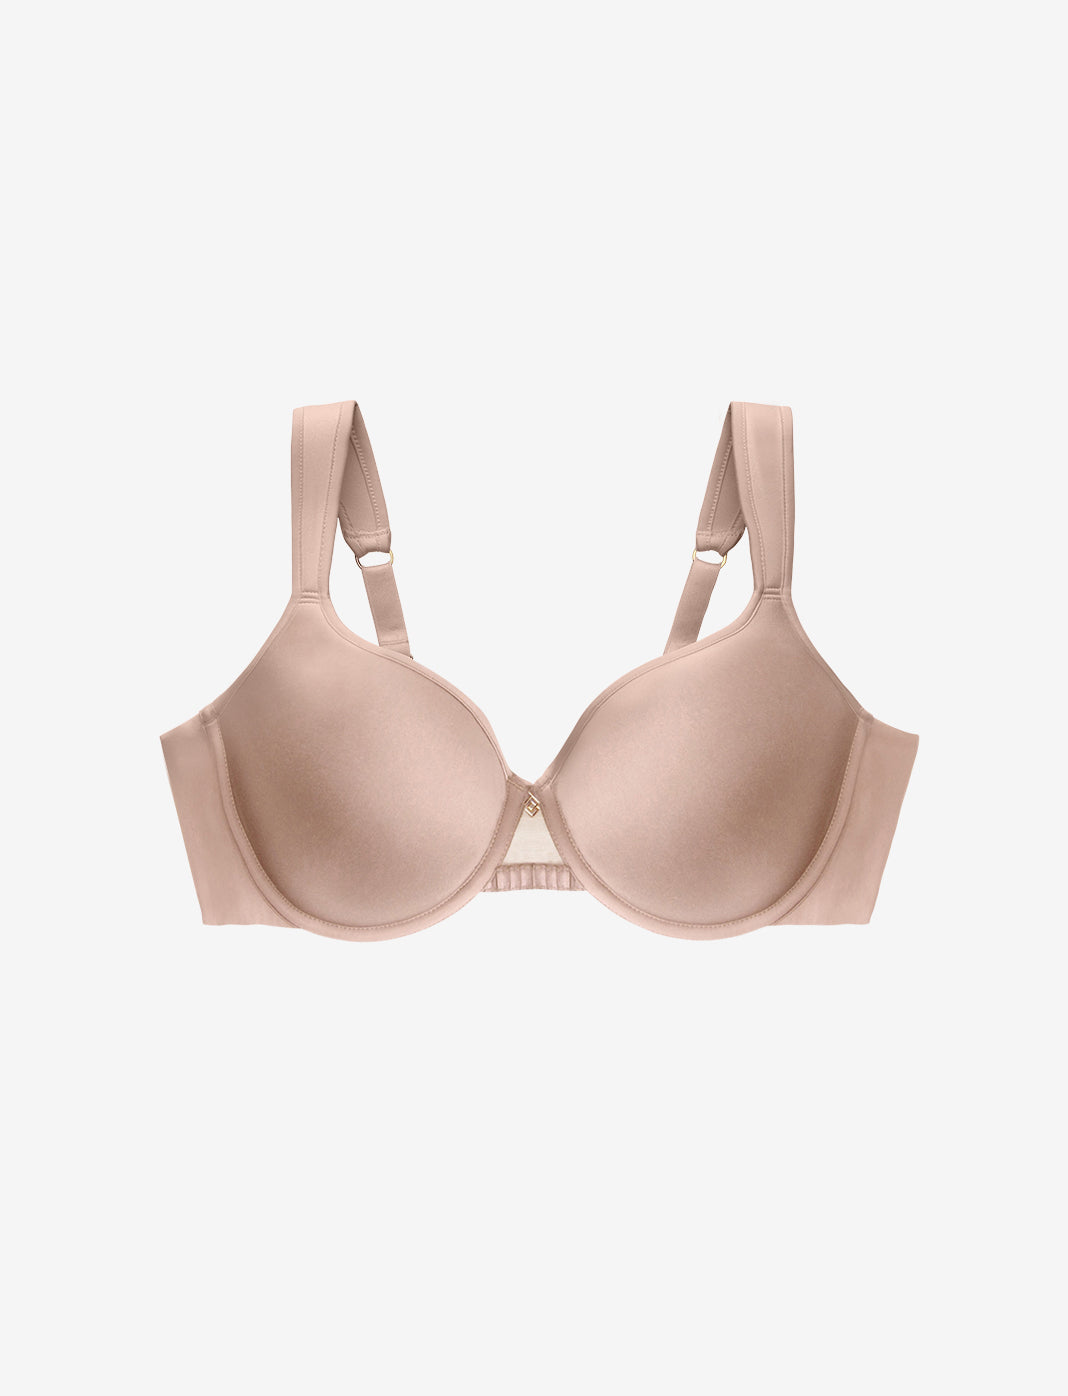 Bras for Women Full Coverage Wireless Bra Push Up Shaping Cups Charm  Minimizer Bras Soft Support Everyday Underwear Bras